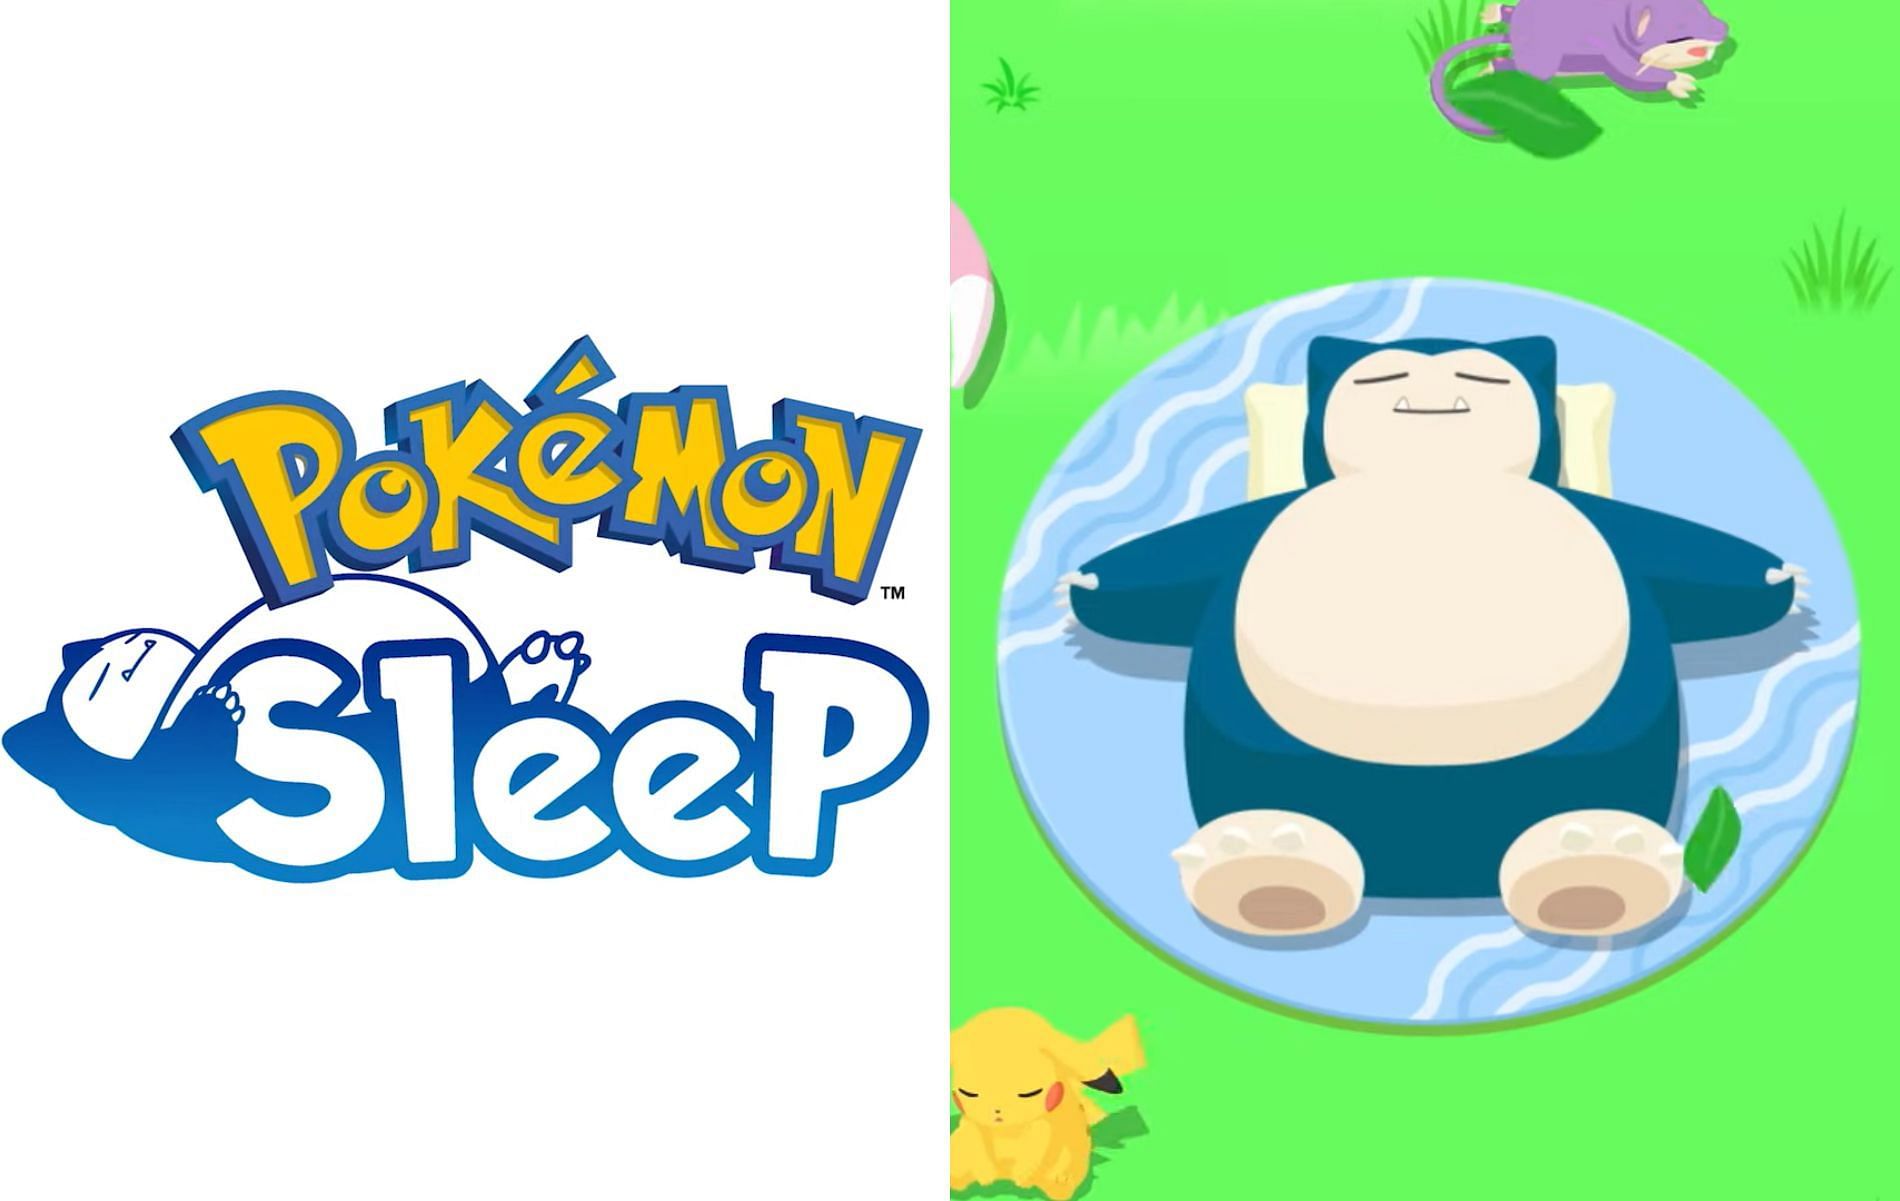 Enhance your sleeping experience with this new upcoming app (Images via The Pokemon Company)